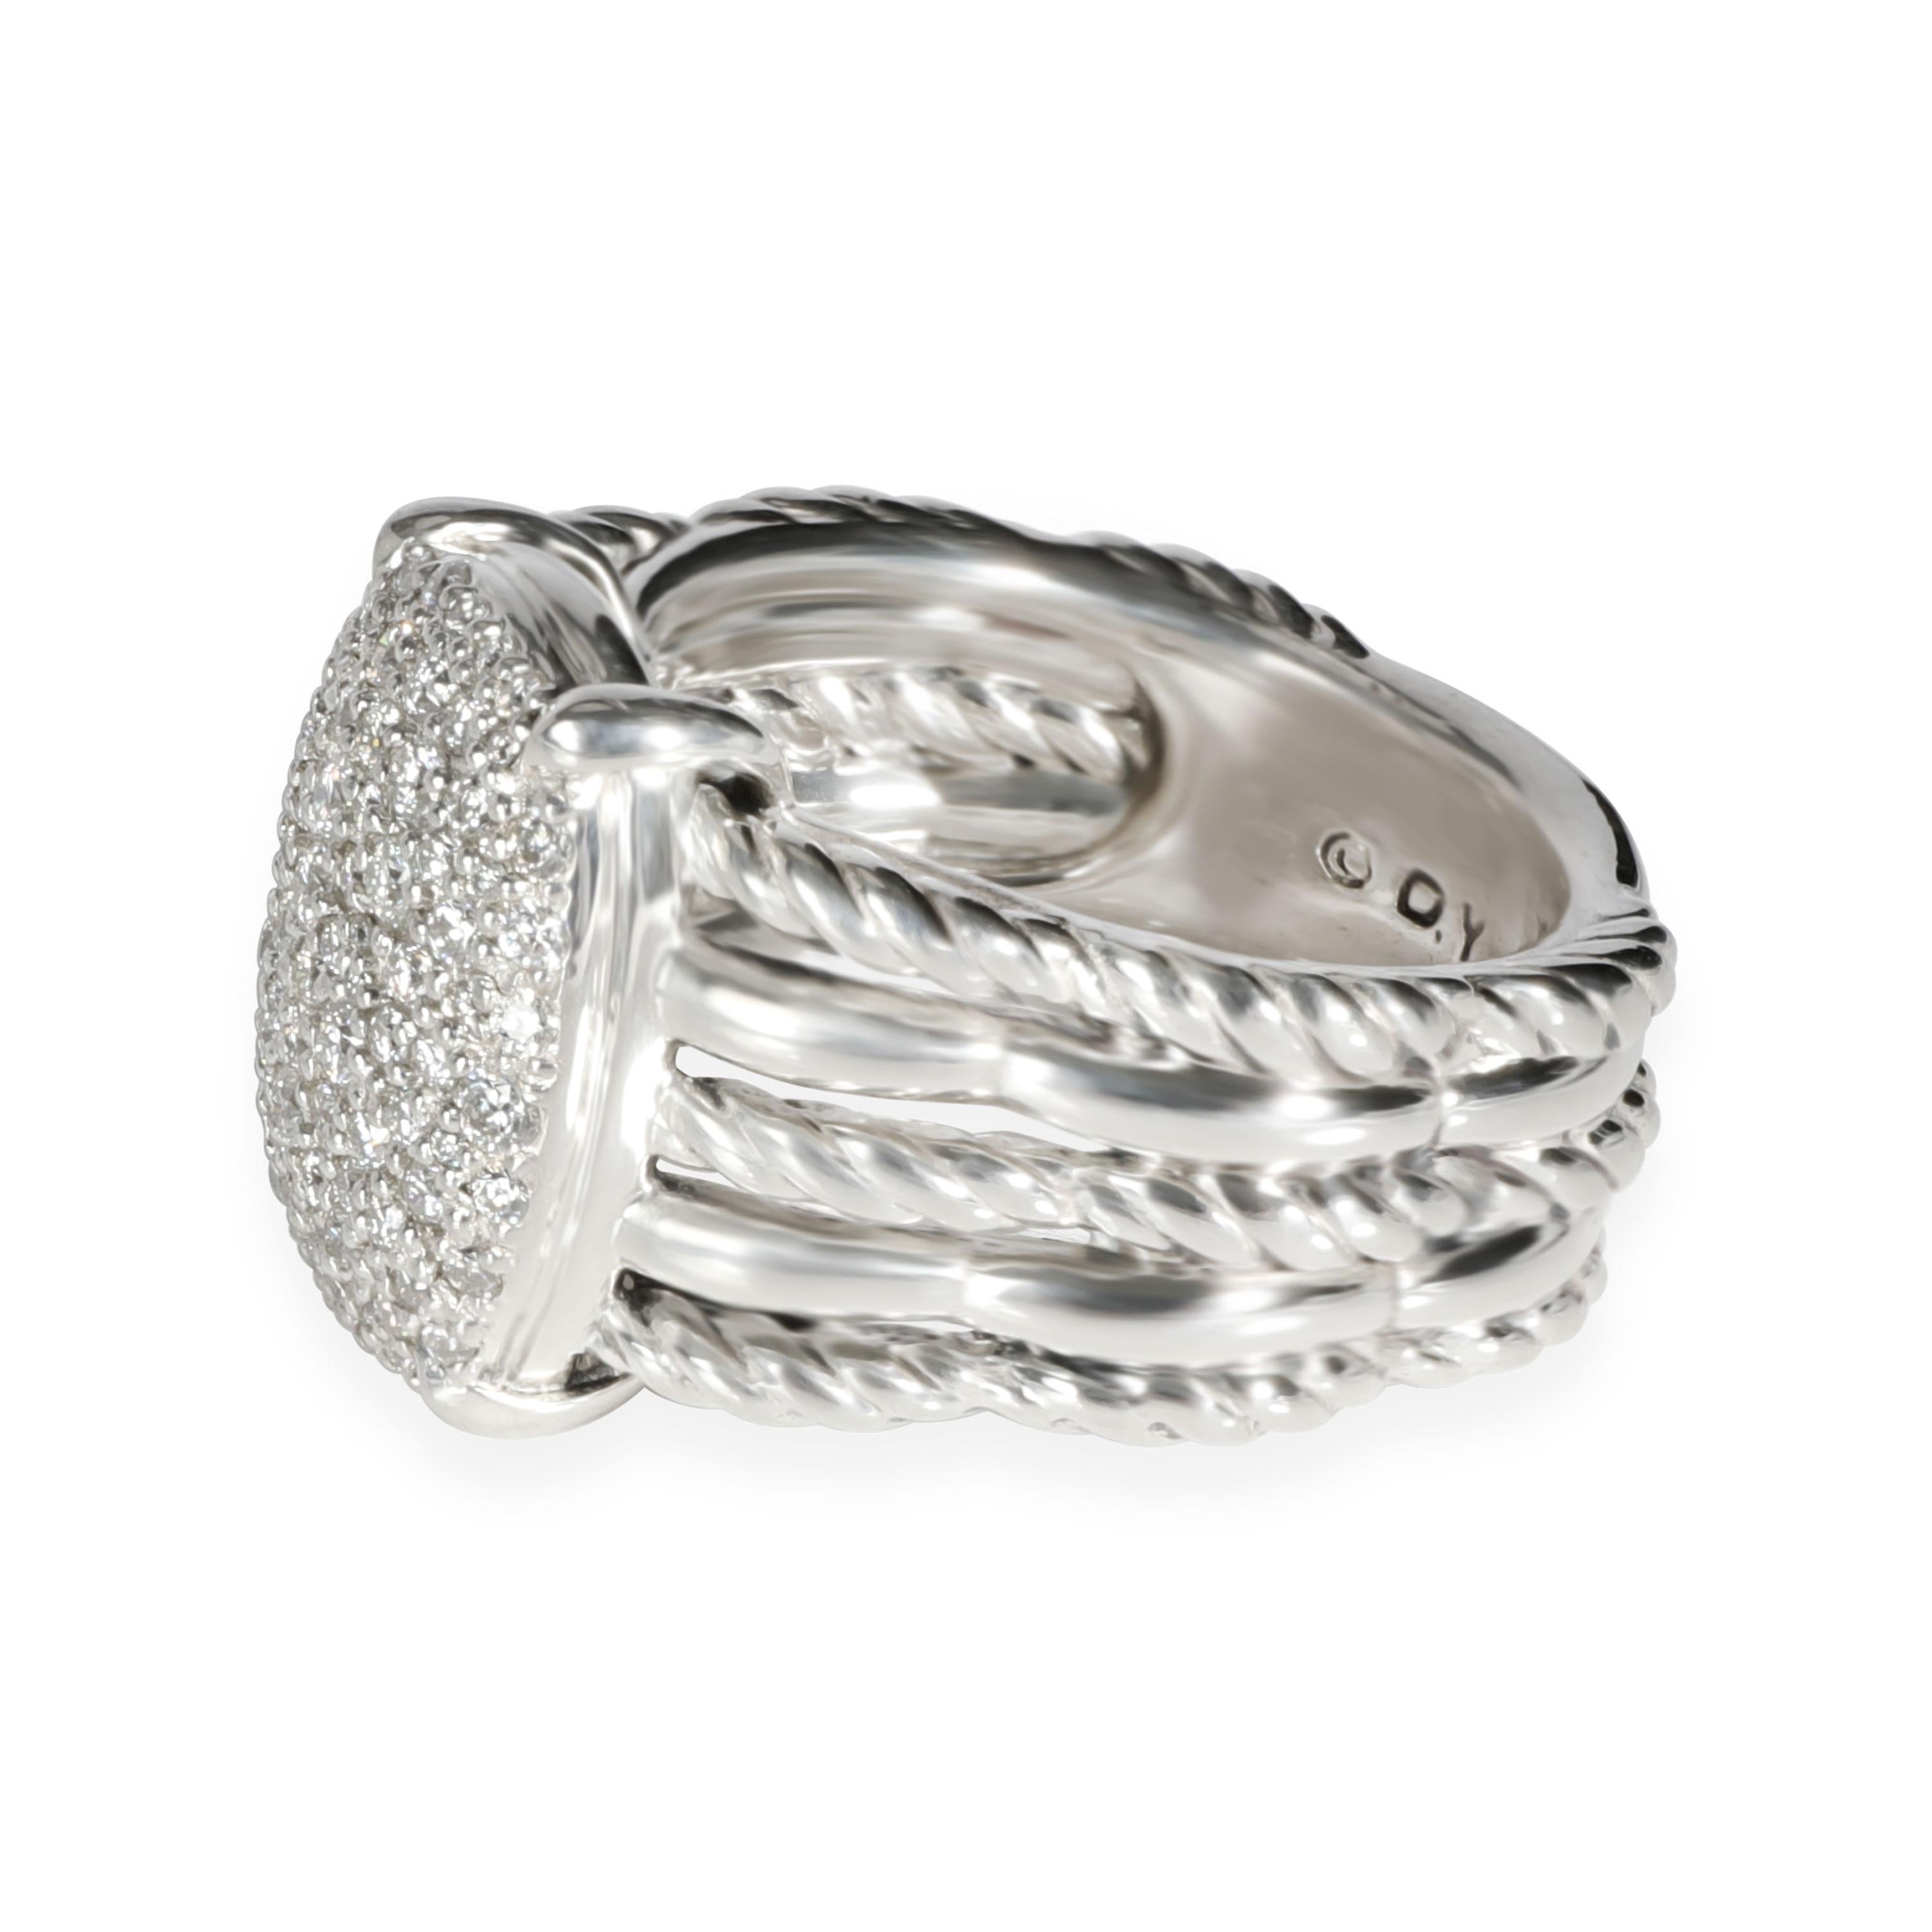 David Yurman Wheaton Diamond Ring in  Sterling Silver 0.75 CTW

PRIMARY DETAILS
SKU: 107765
Listing Title: David Yurman Wheaton Diamond Ring in  Sterling Silver 0.75 CTW
Condition Description: Retails for 2,850 USD. In excellent condition and